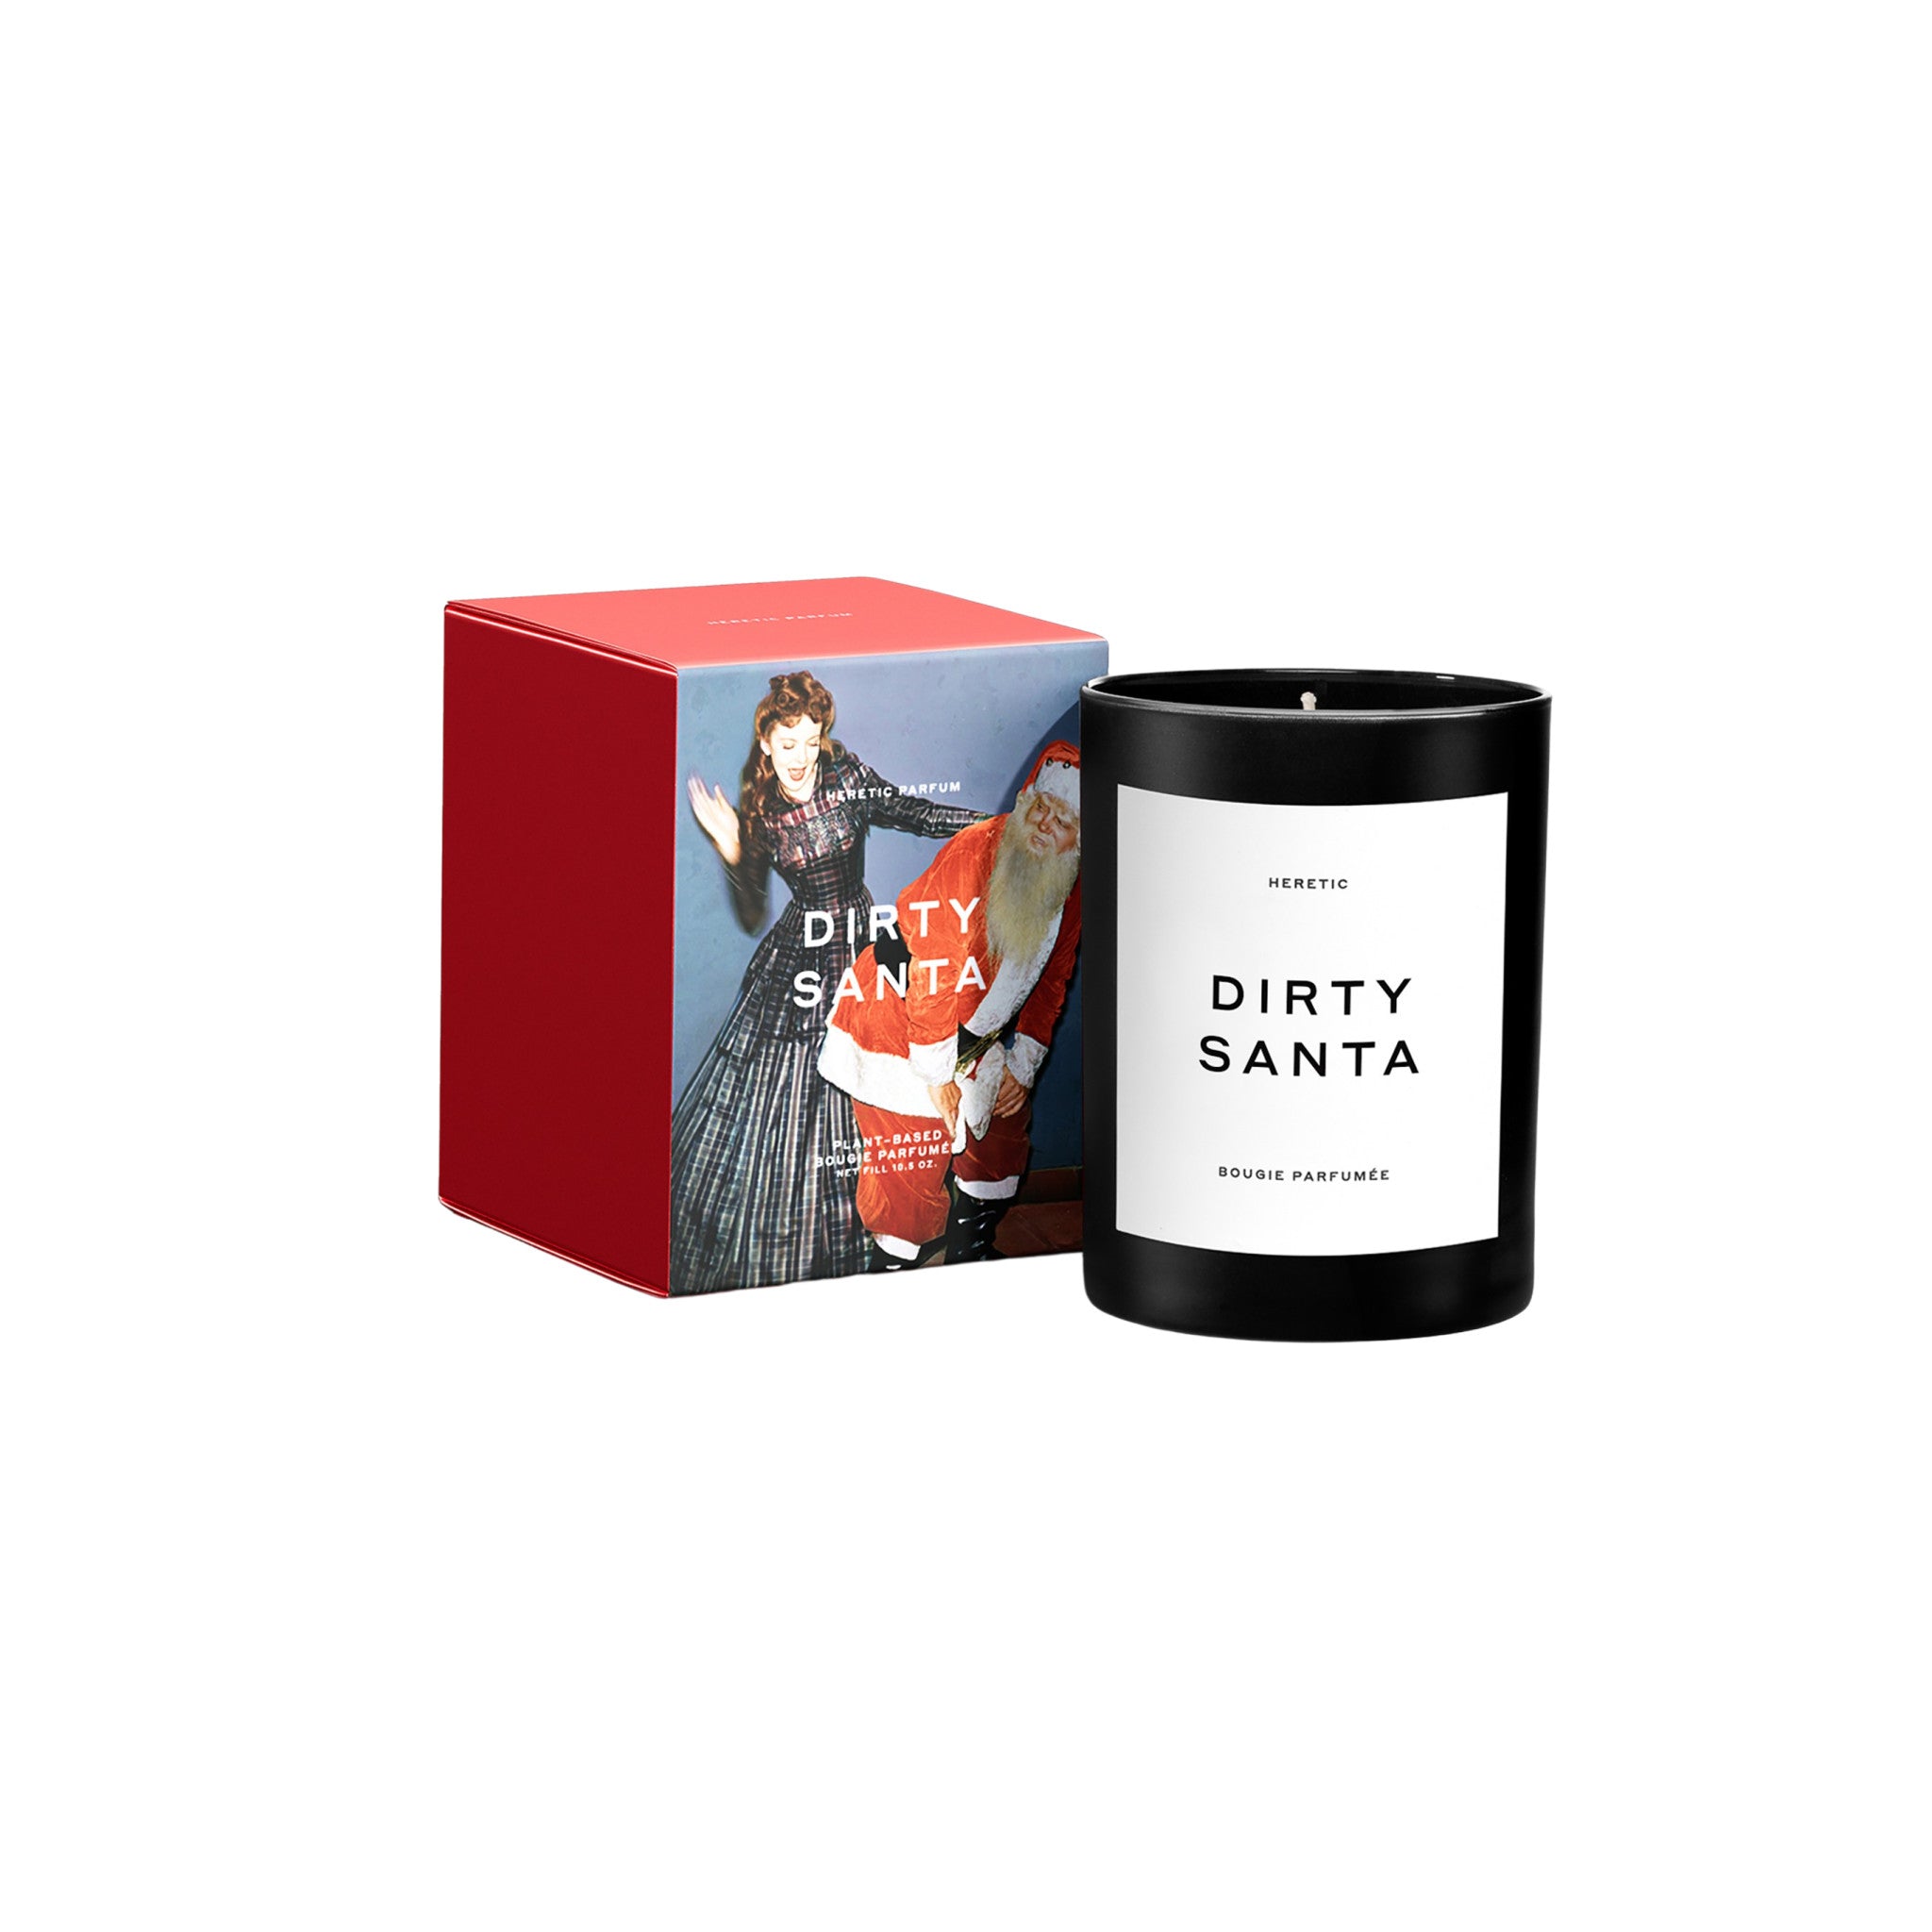 Heretic Dirty Santa Candle (Limited Edition) main image.